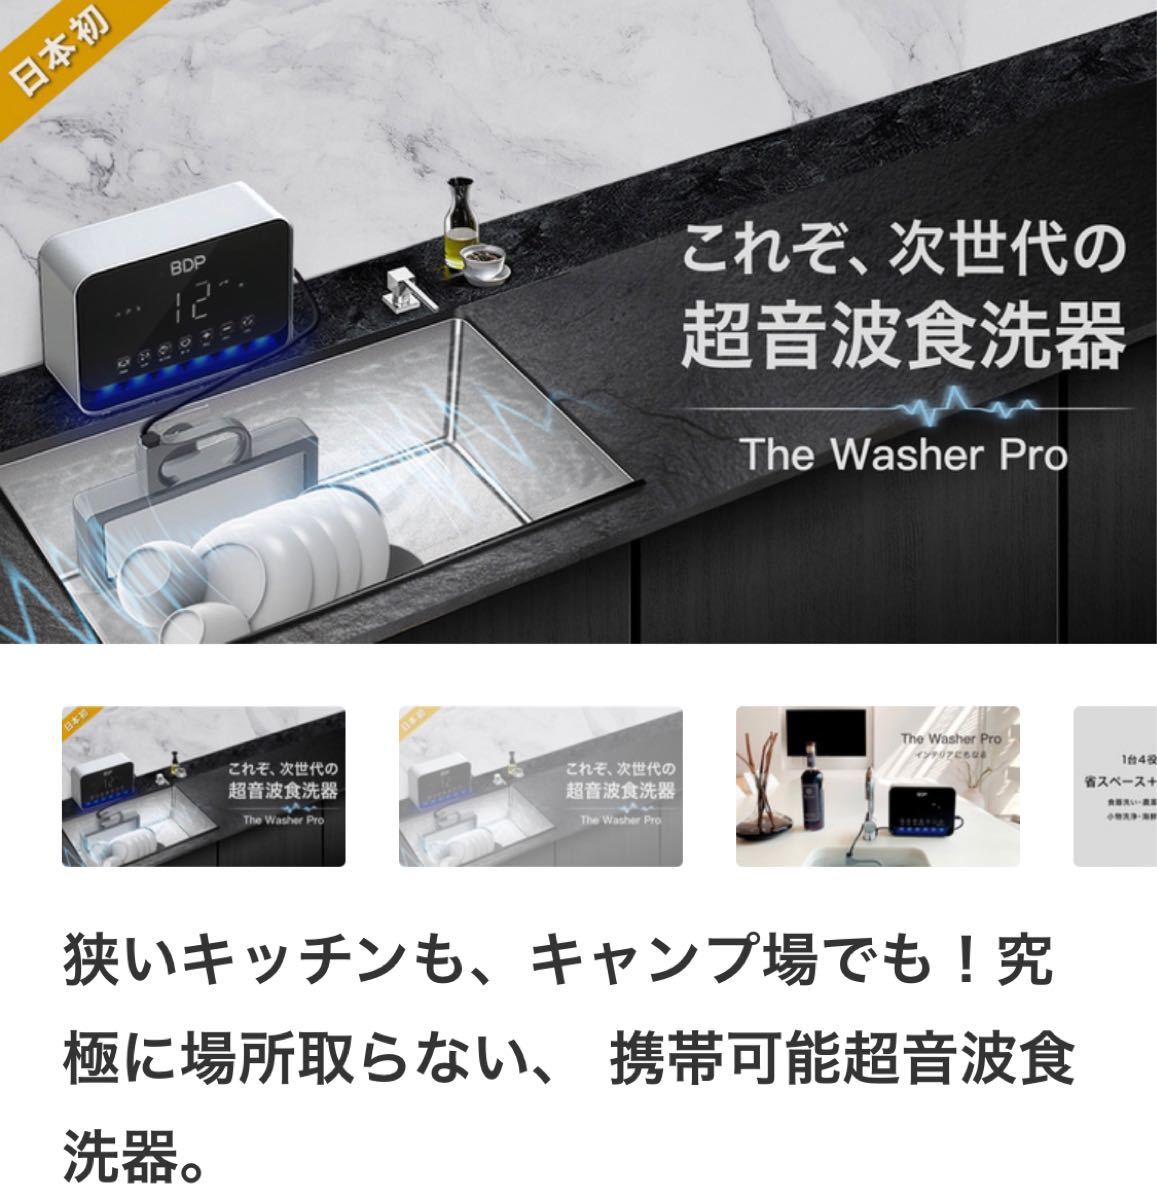 The washer pro 携帯可能超音波食洗機【お値下げ可】 | befoods.cl